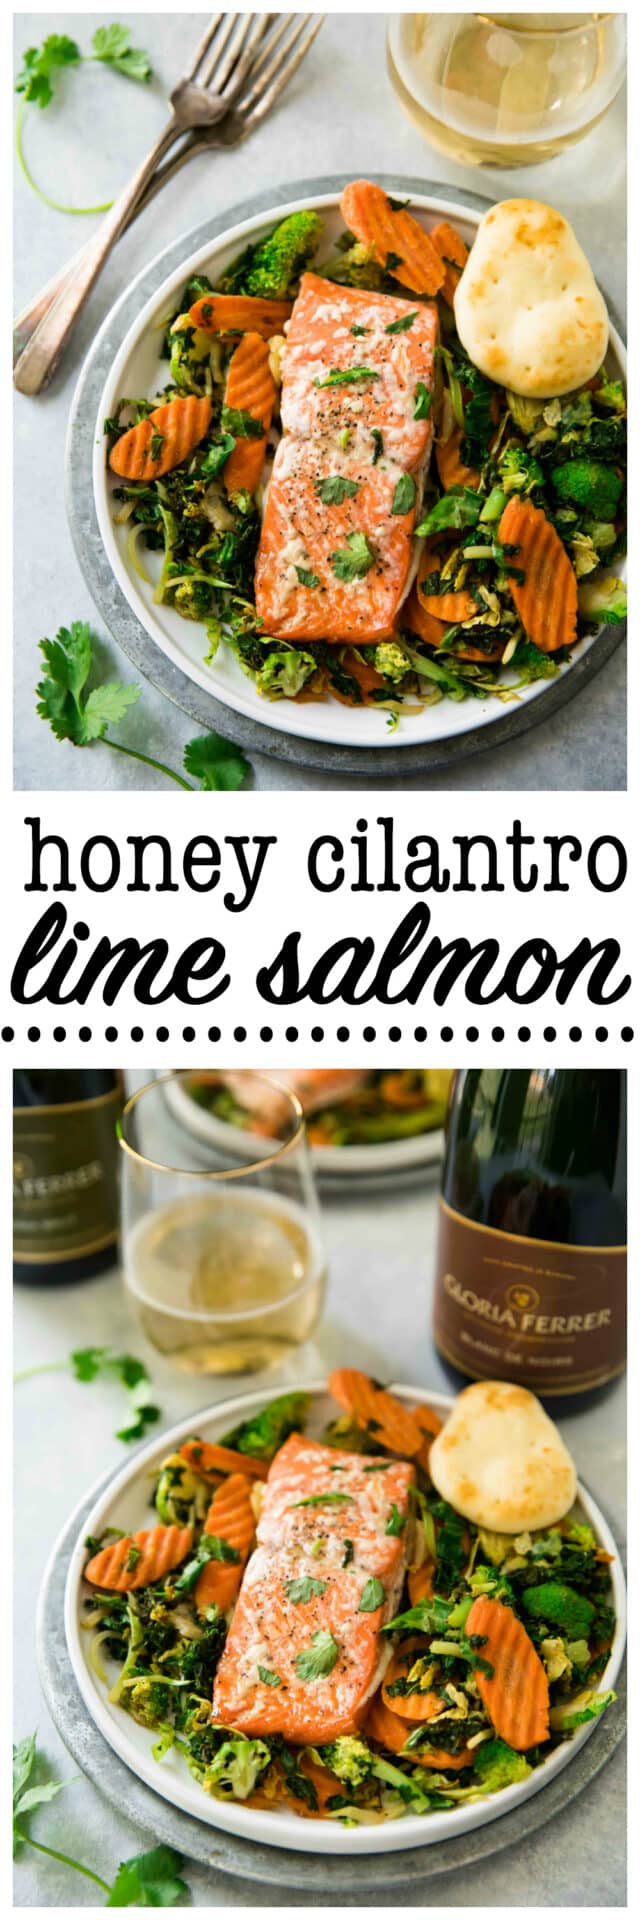 This Honey Cilantro Lime Salmon is simple, delicious and perfect for an easy family meal as well as impressive enough for a dinner party. Serve with Gloria Ferrer for a real stunner!